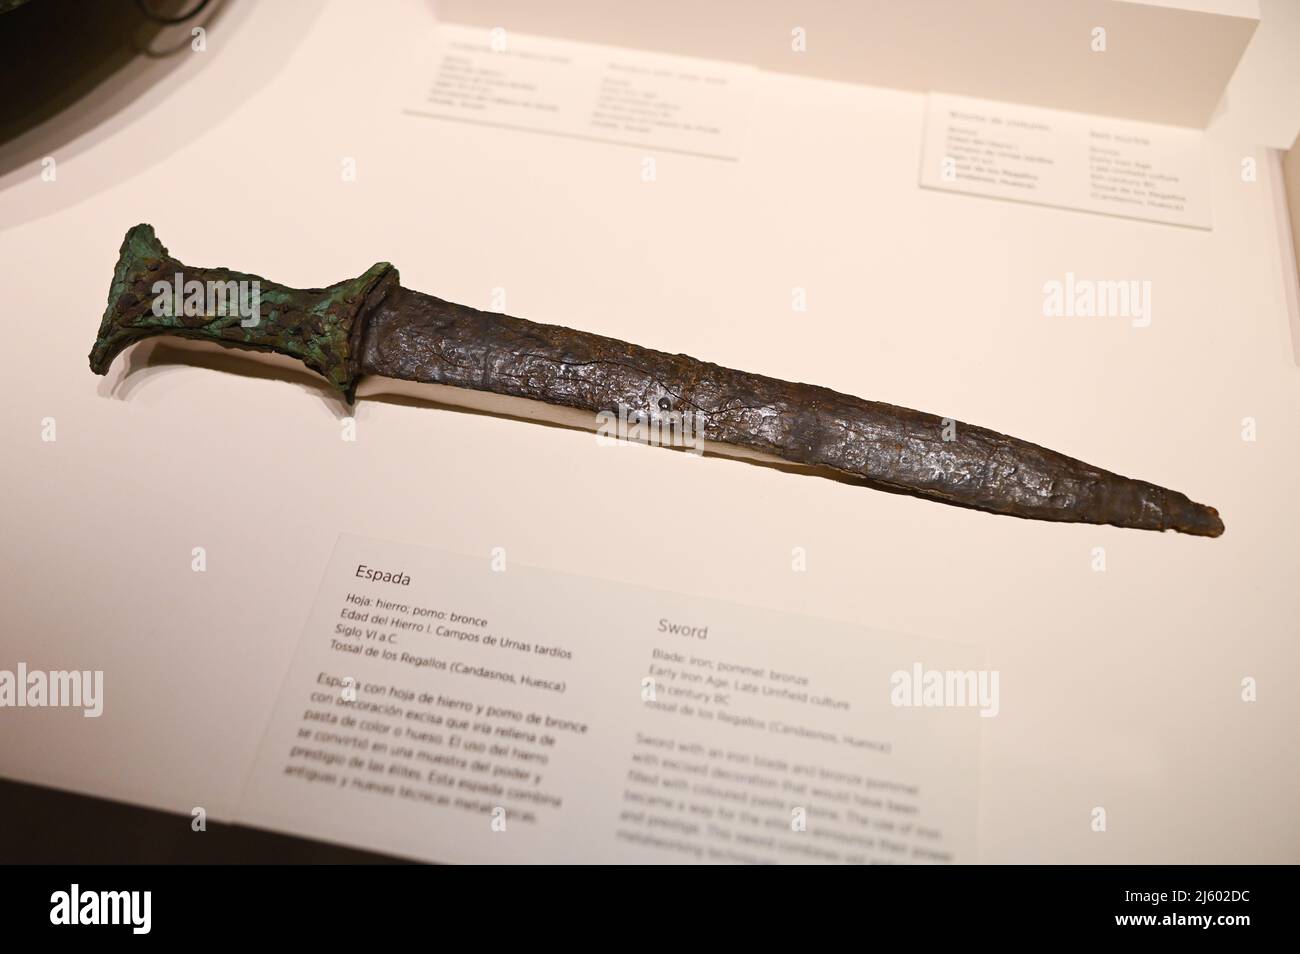 Sword. Bronze and Iron. Early Iron Age. 6th century BC, Huesca, Spain.    The National Archaeological Museum (MAN), which houses one of the world's mo Stock Photo